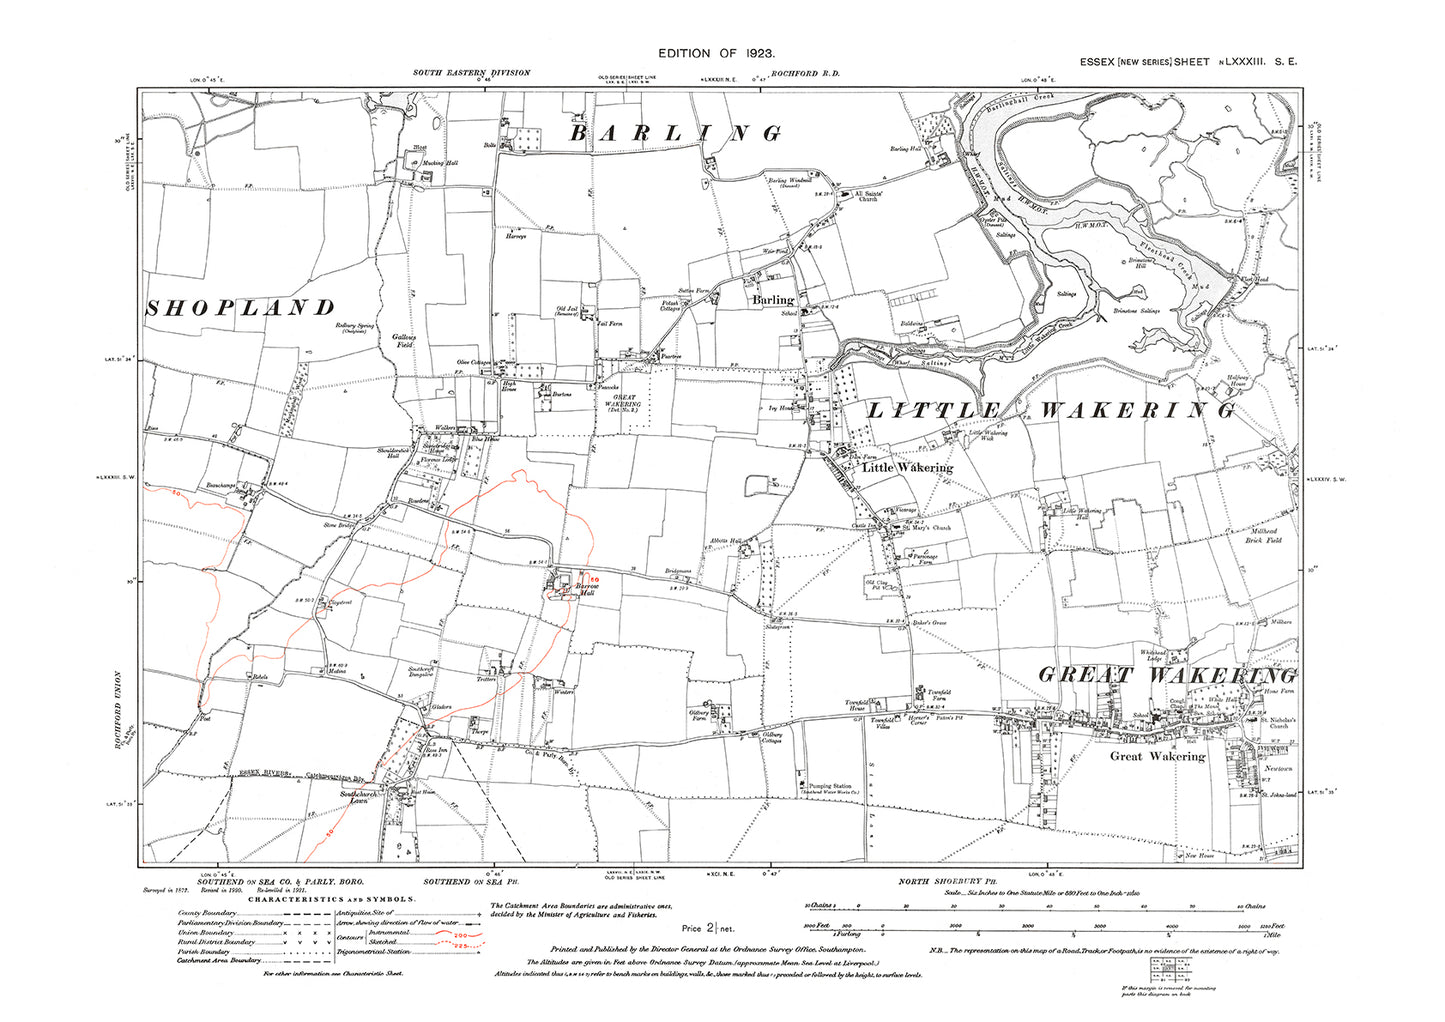 Old OS map dated 1923, showing Great Wakering and Little Wakering in Essex - 83SE